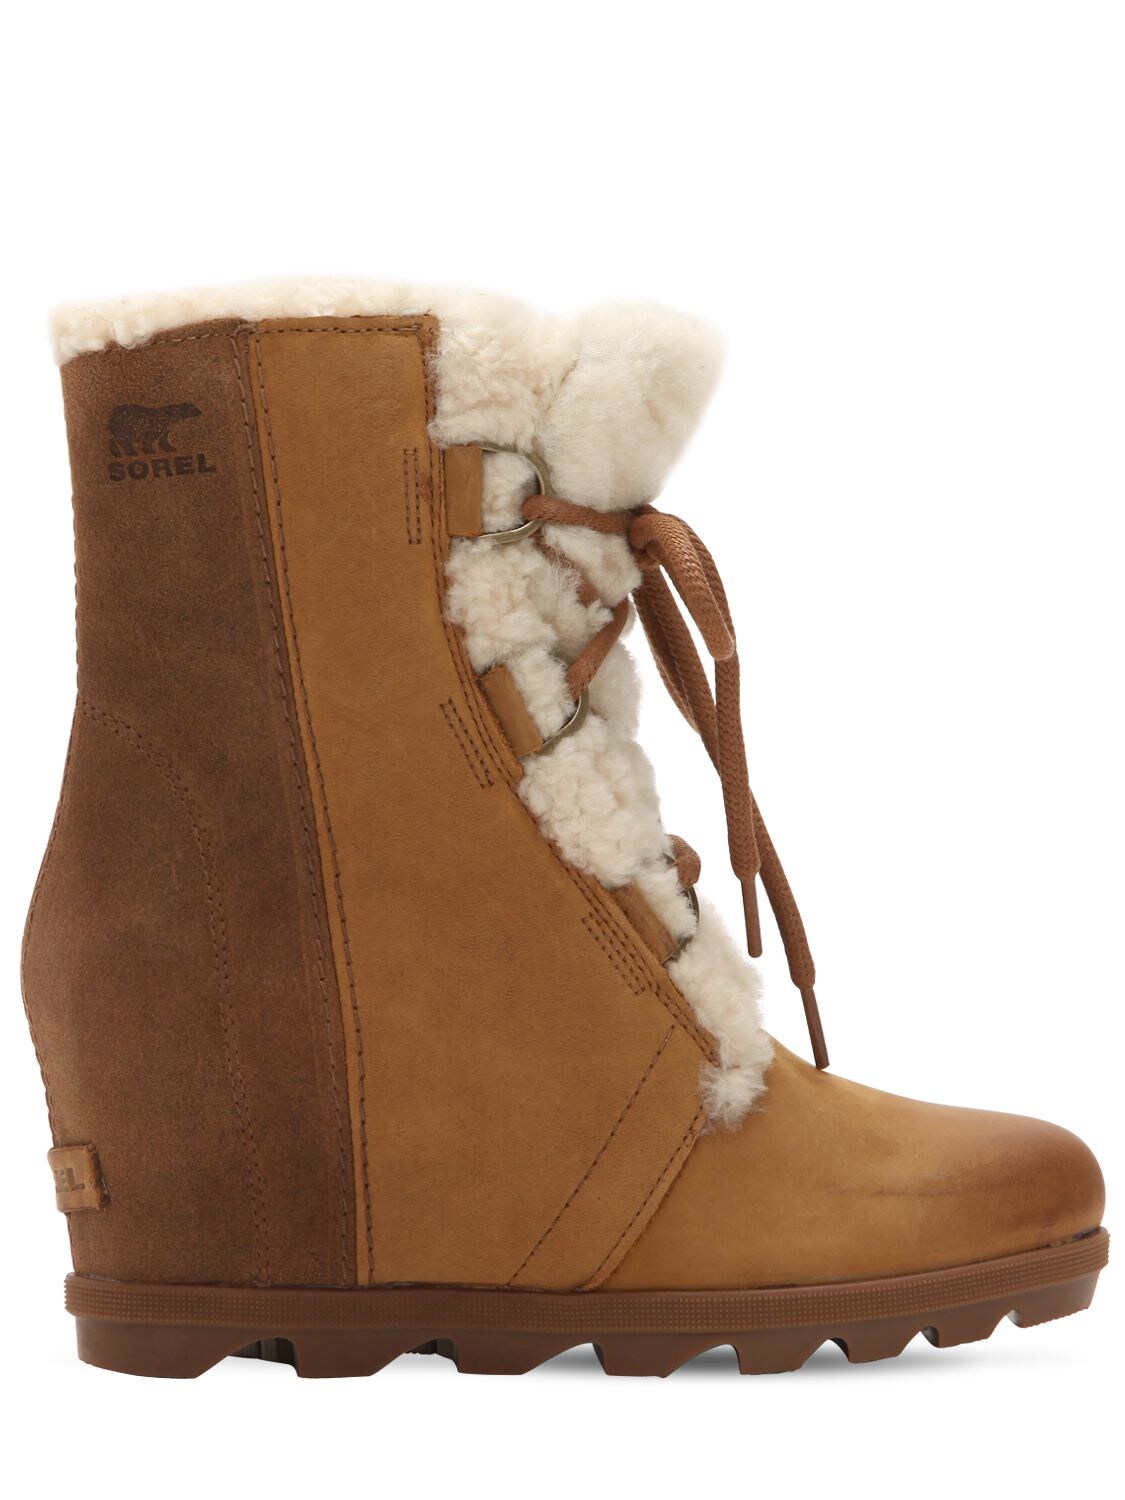 Sorel Joan Of Arctic Shearling Wedge Boots In Light Brown